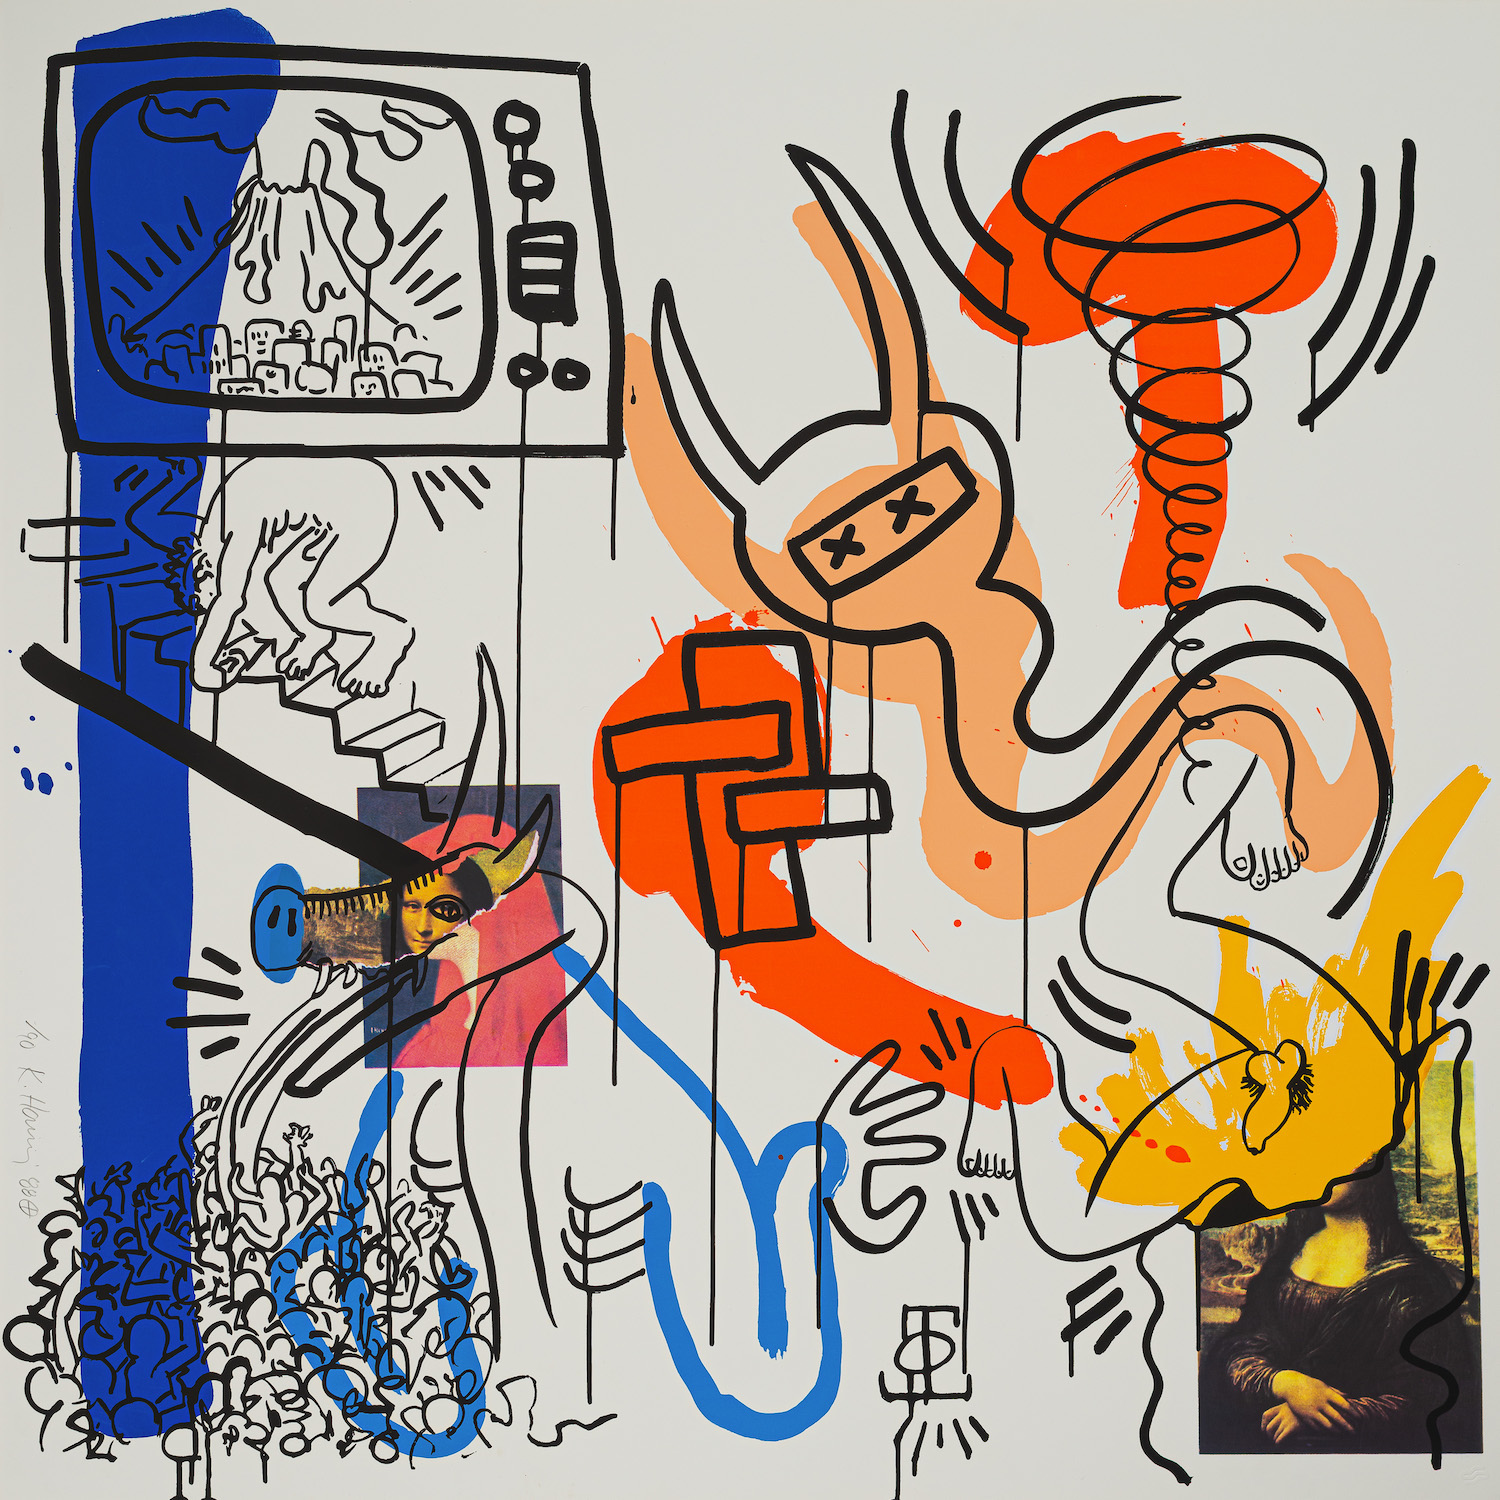 The Apocalypse 7 screenprint by Keith Haring from 1988.